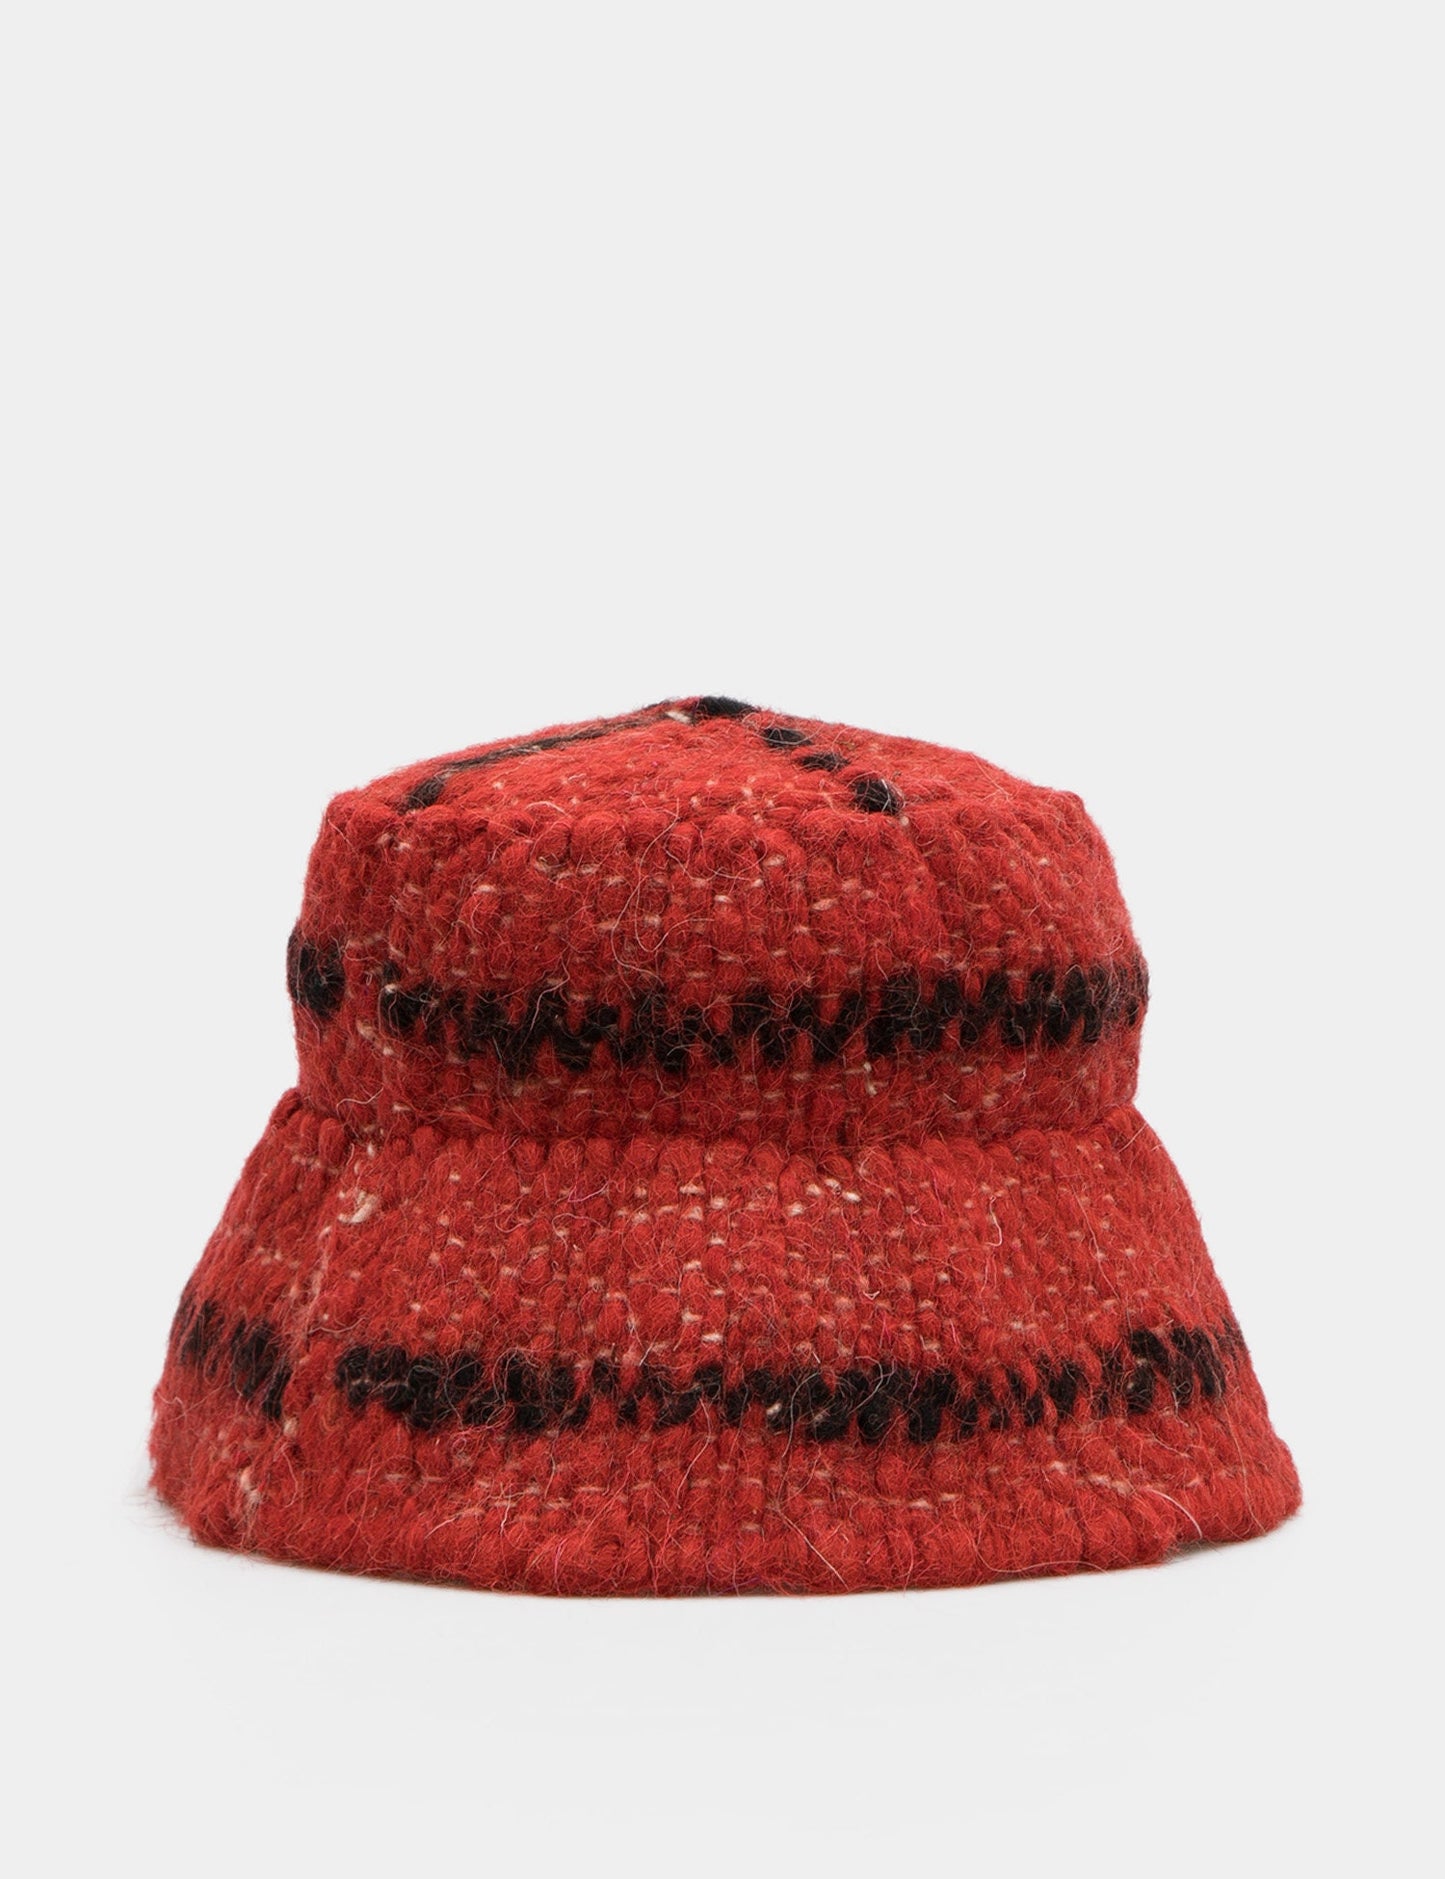 Red striped hat